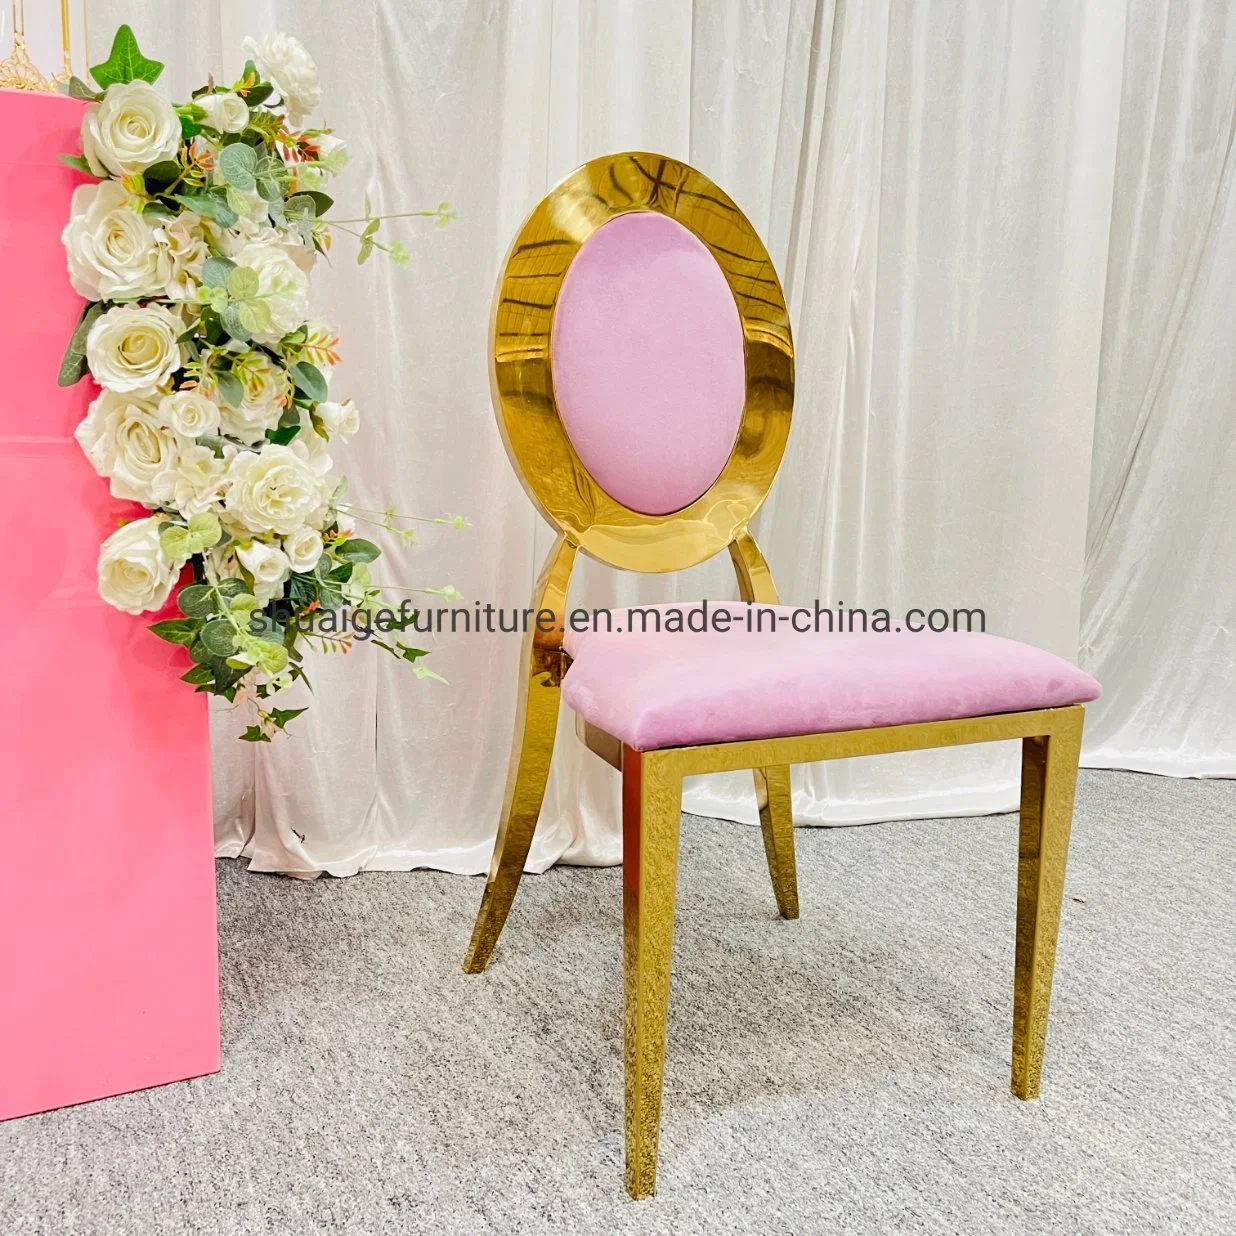 Cheap Price Pink Velvet Cushion Gold Stainless Steel Wedding Chair